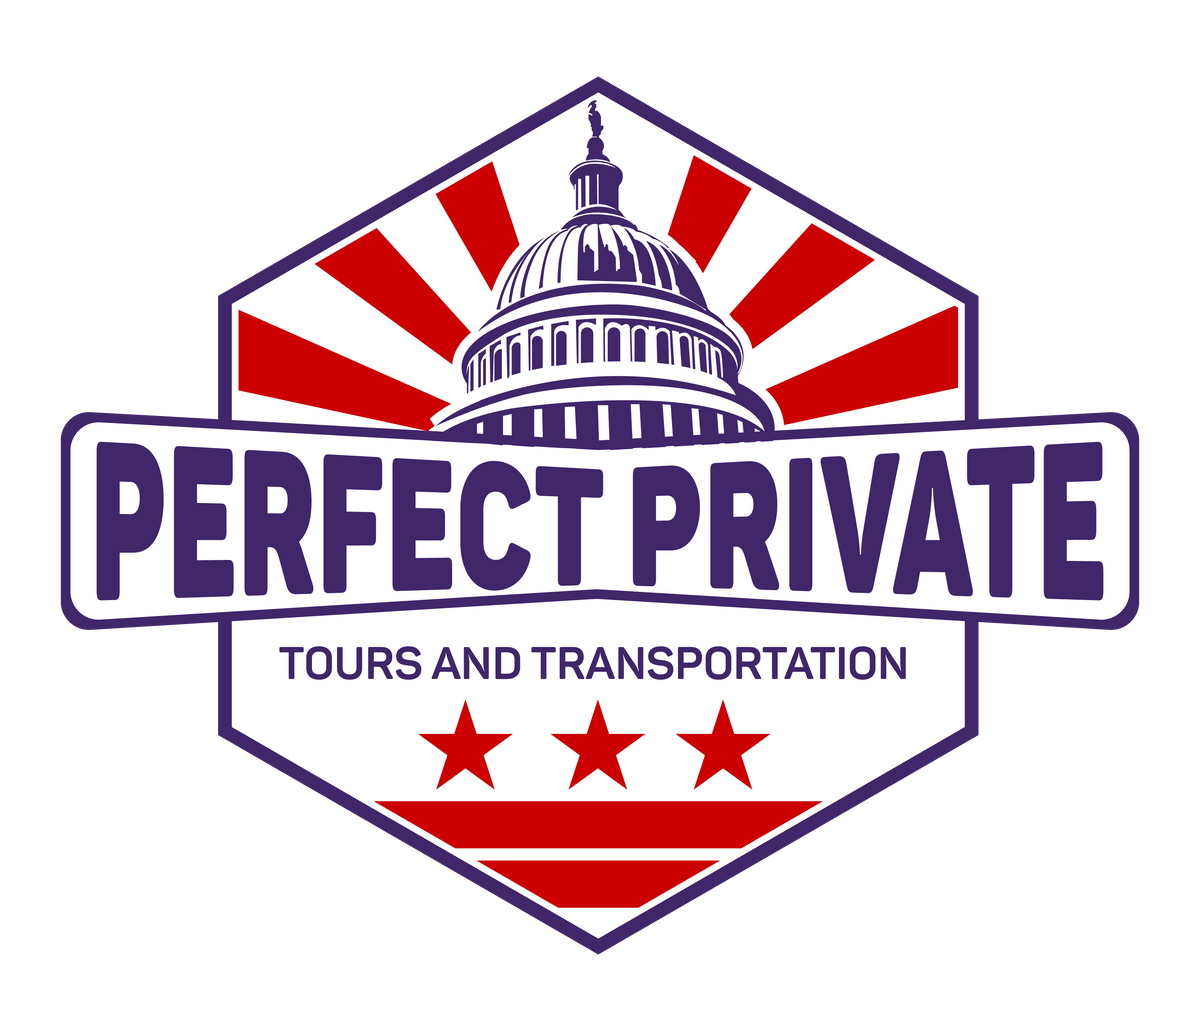 Perfect Private Tours and Transportation